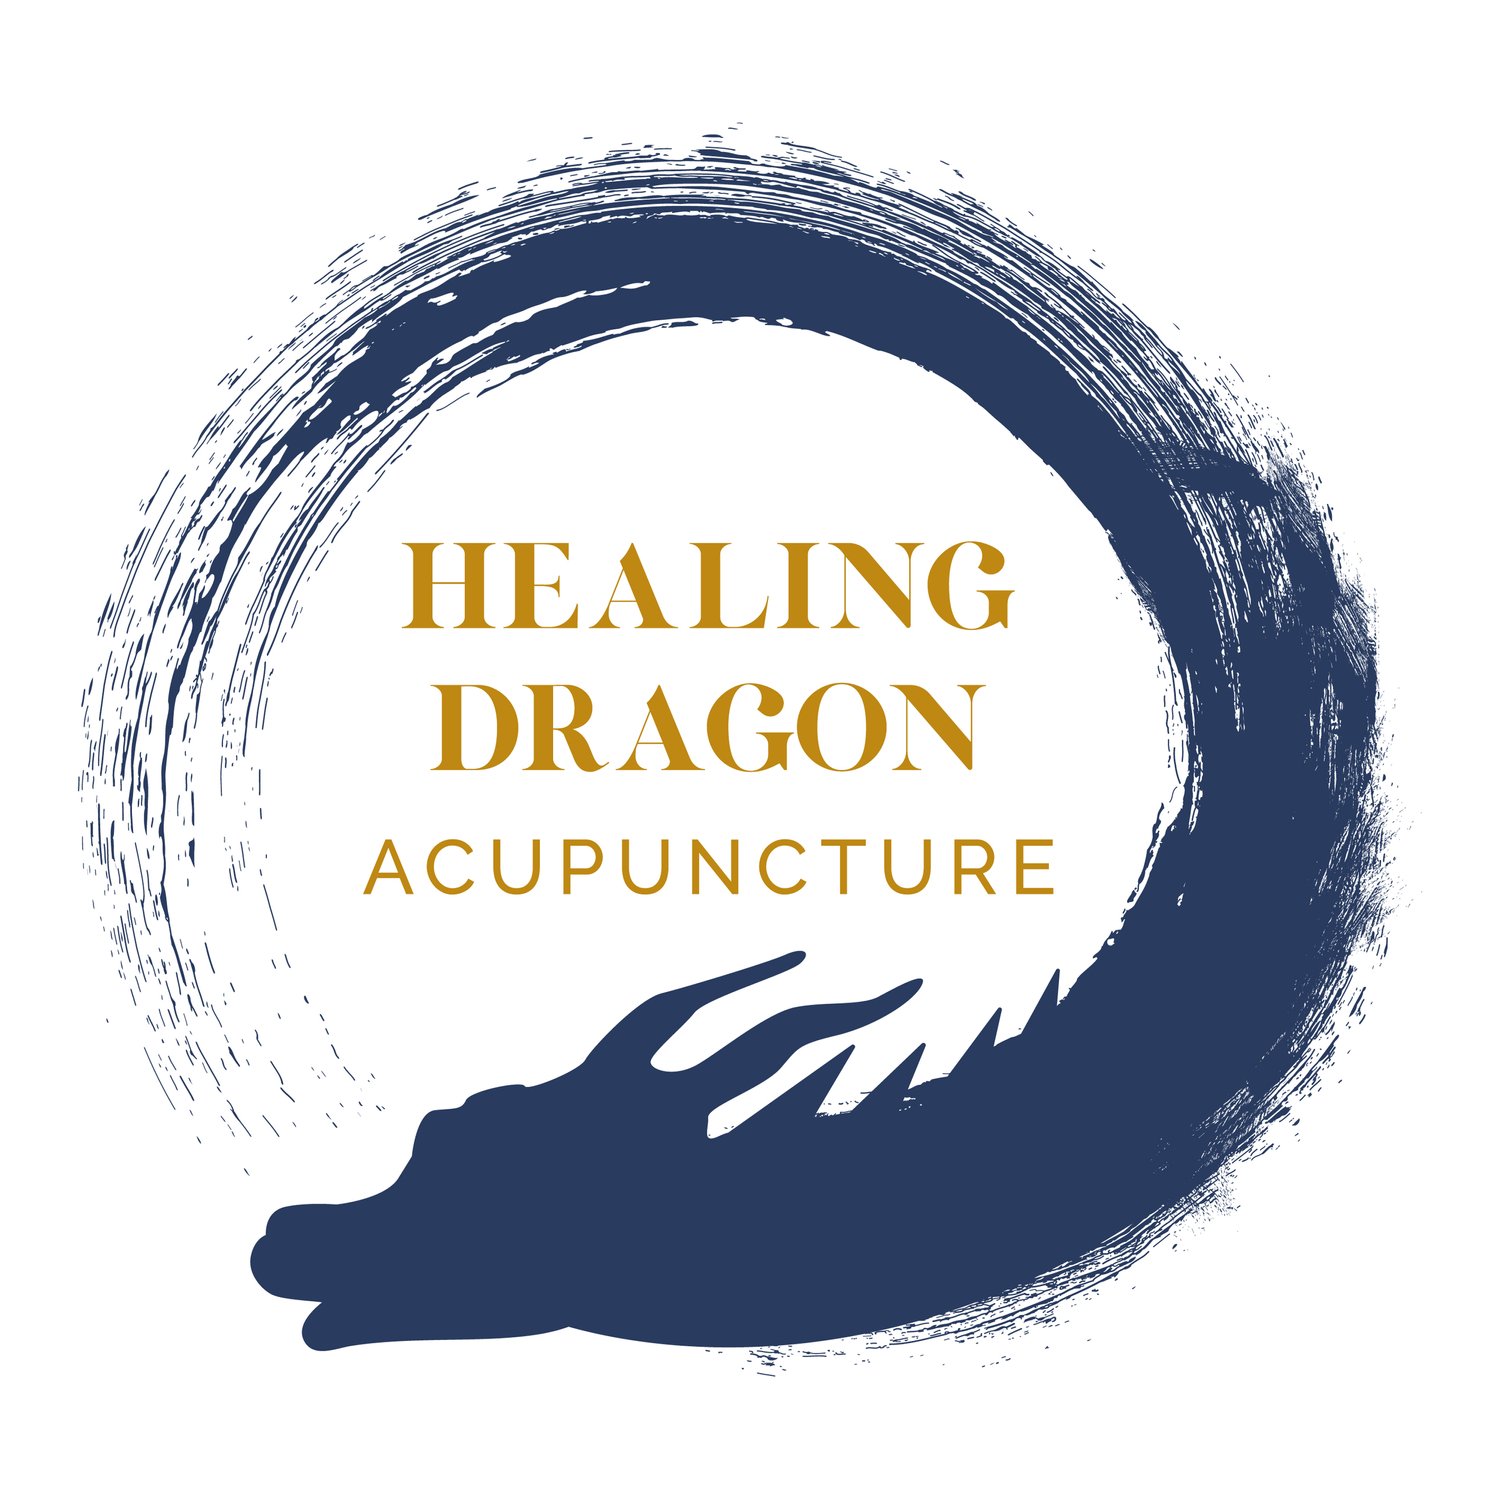 Healing Dragon Acupuncture